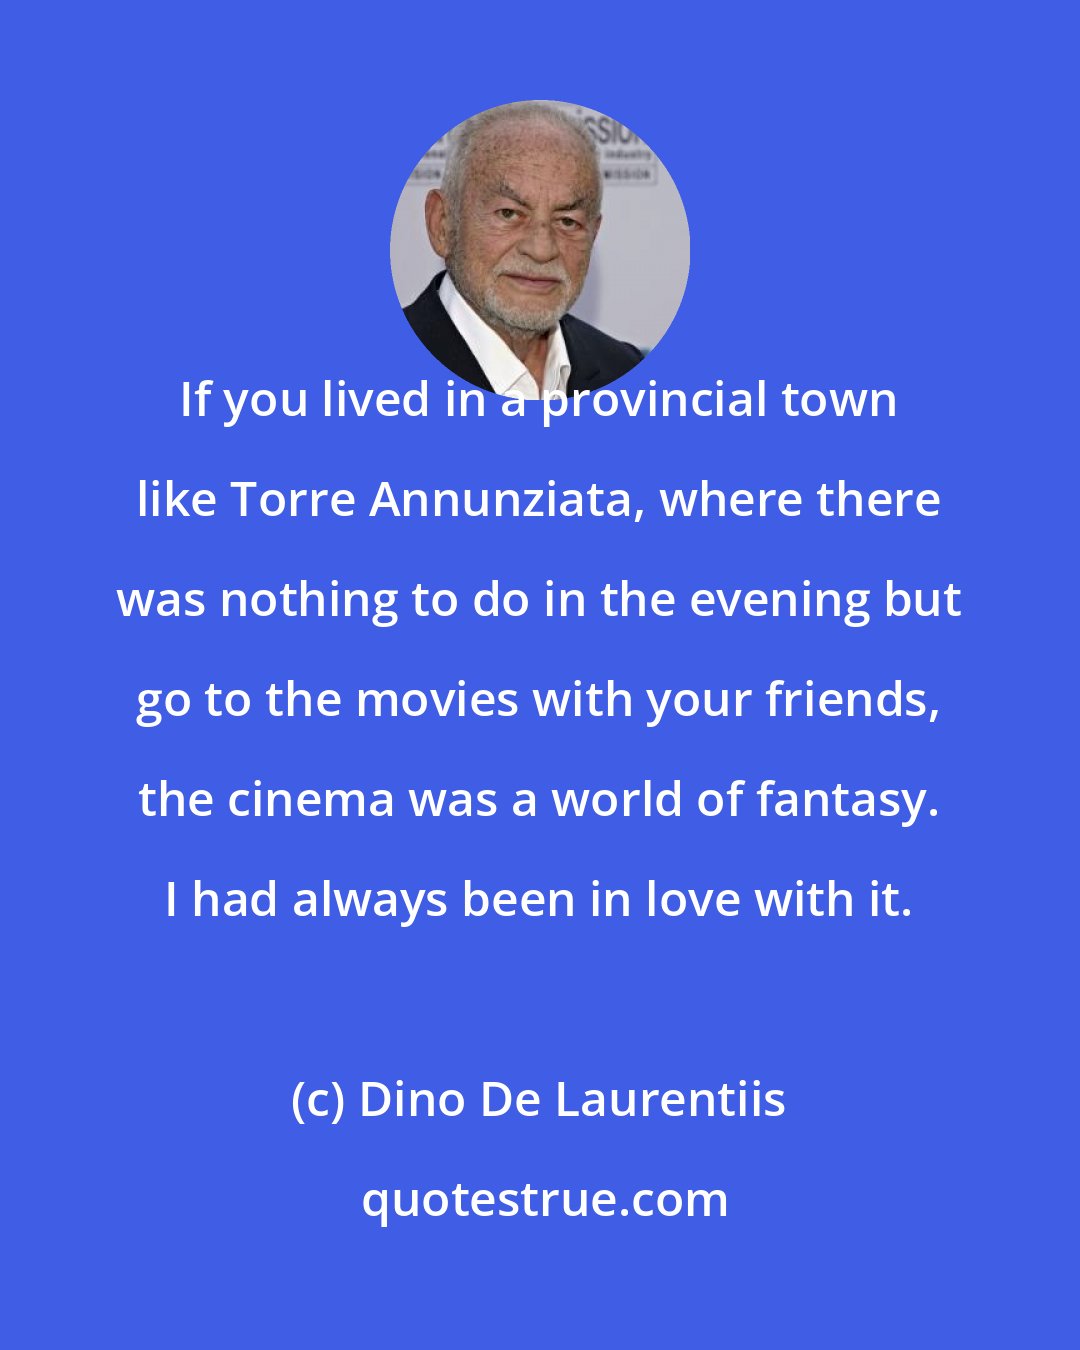 Dino De Laurentiis: If you lived in a provincial town like Torre Annunziata, where there was nothing to do in the evening but go to the movies with your friends, the cinema was a world of fantasy. I had always been in love with it.